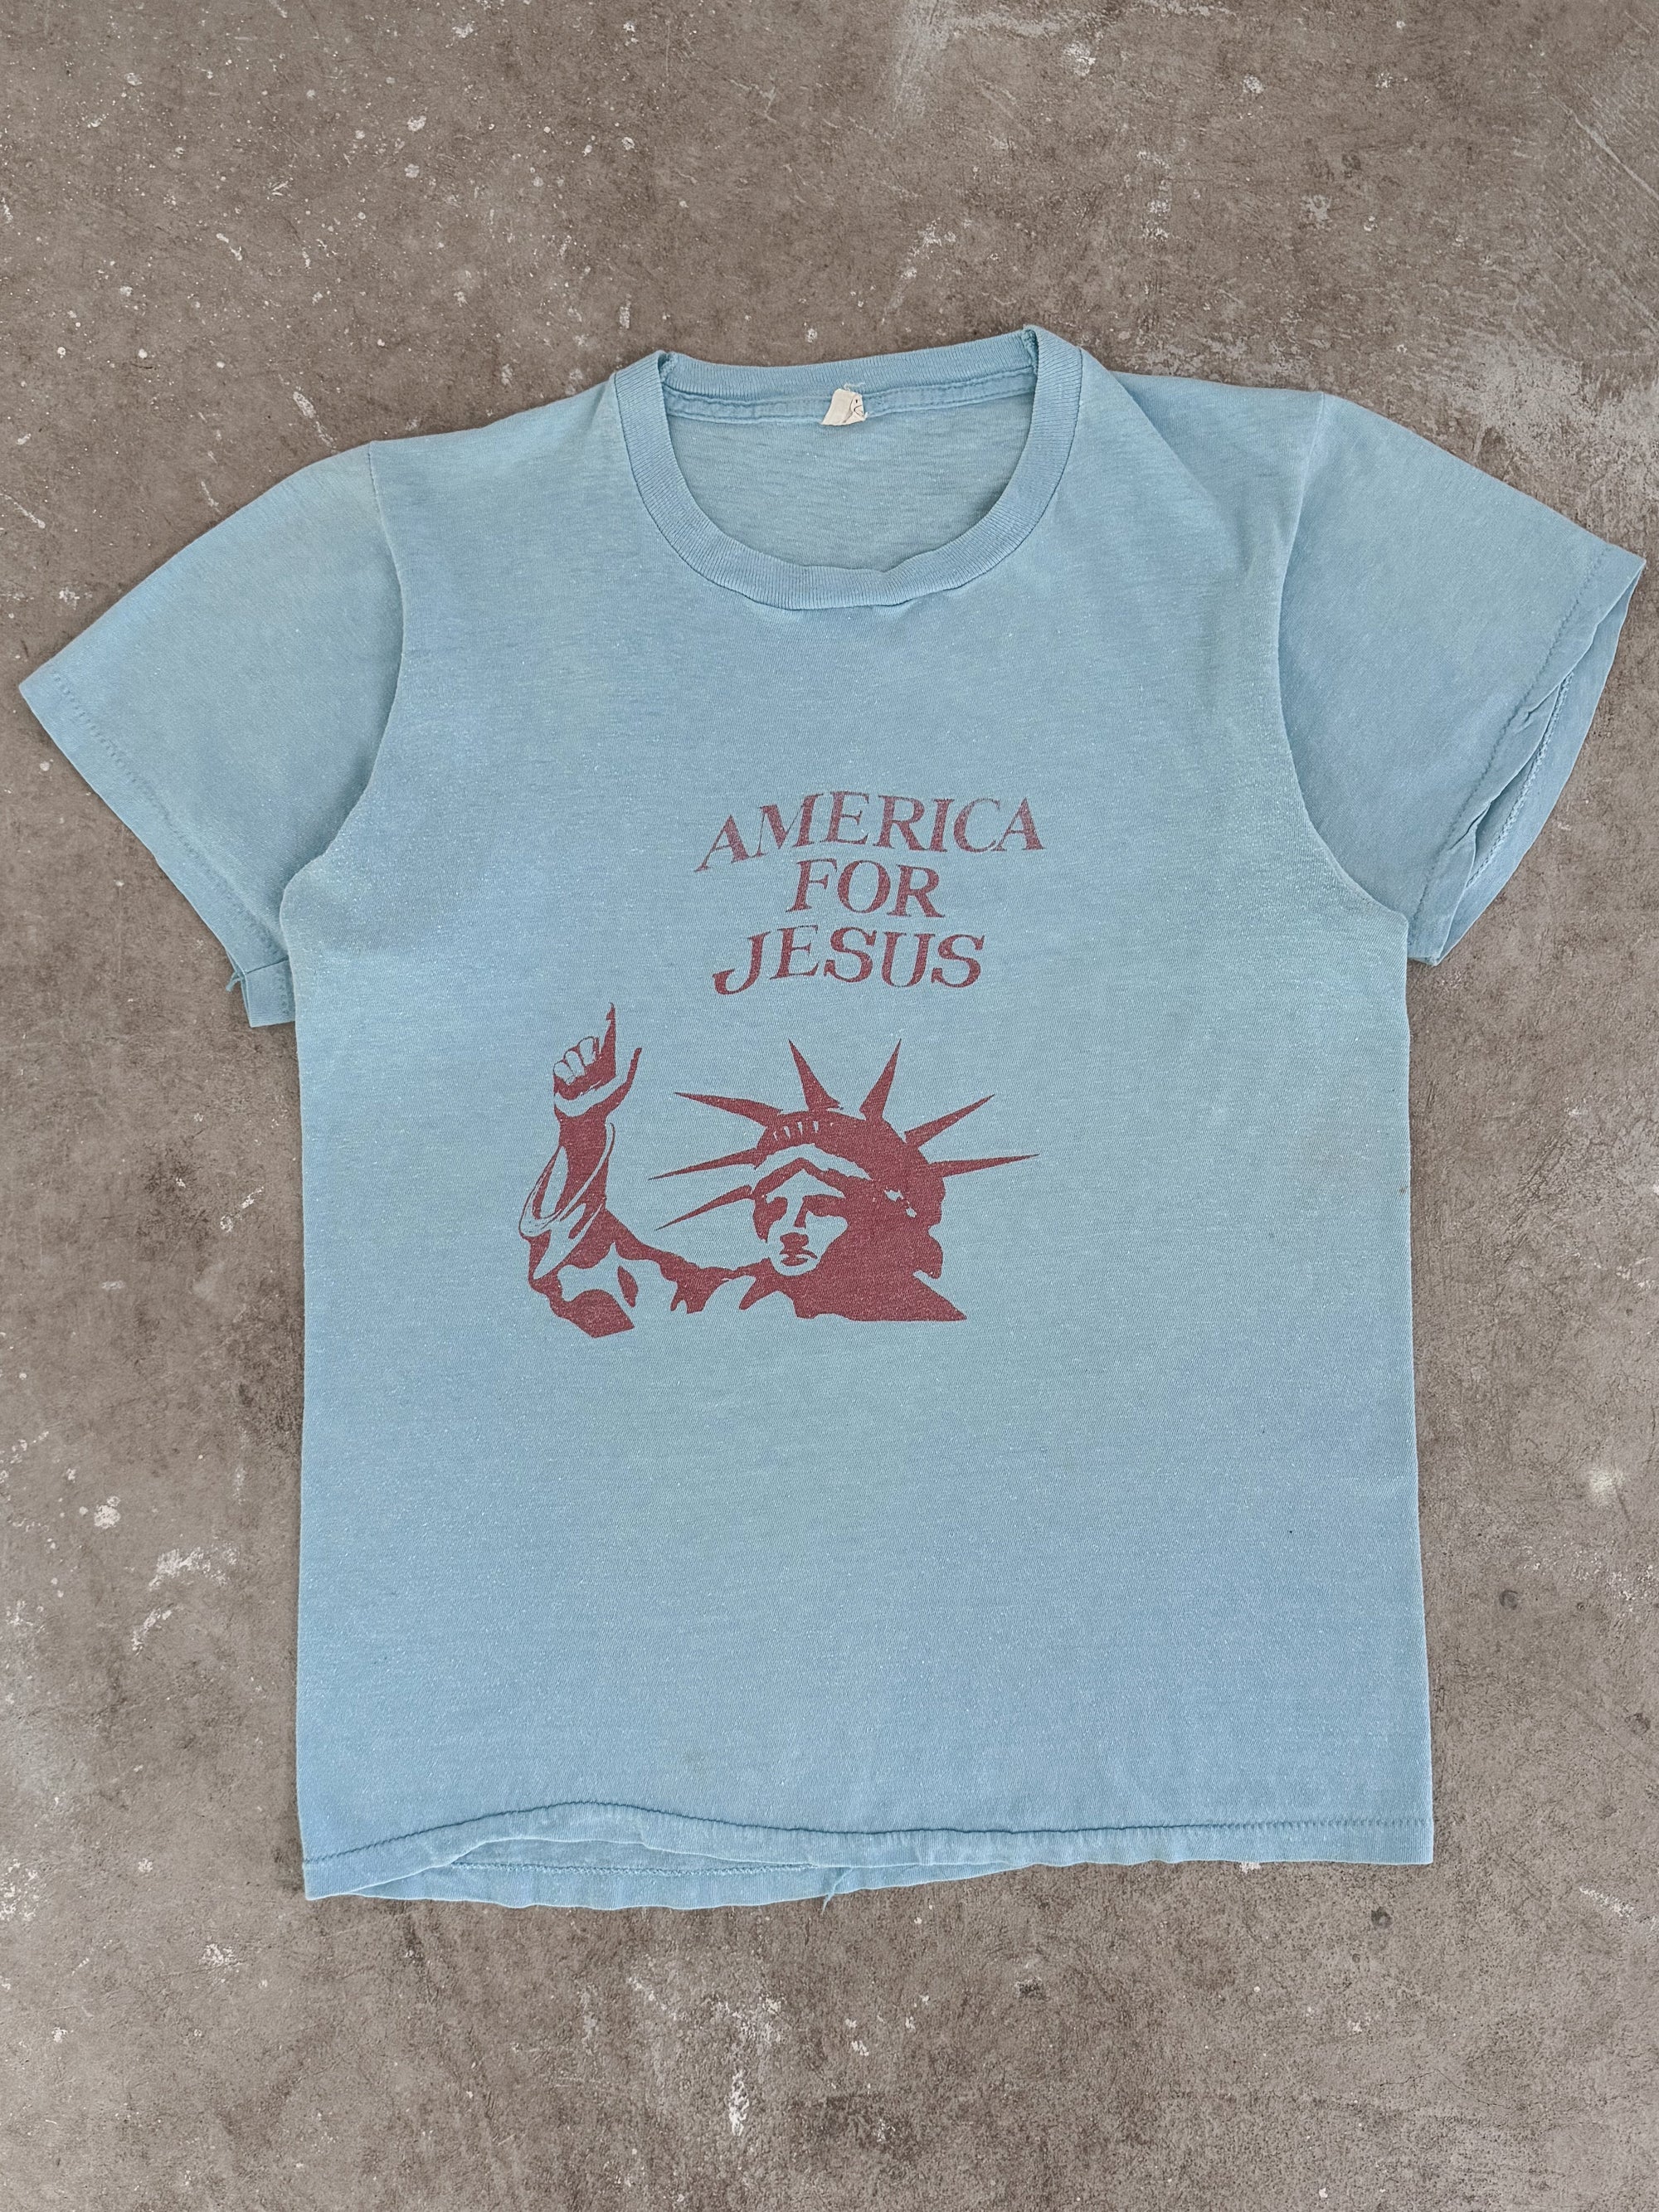 1970s “America For Jesus” Single Stitched Tee (S/M)